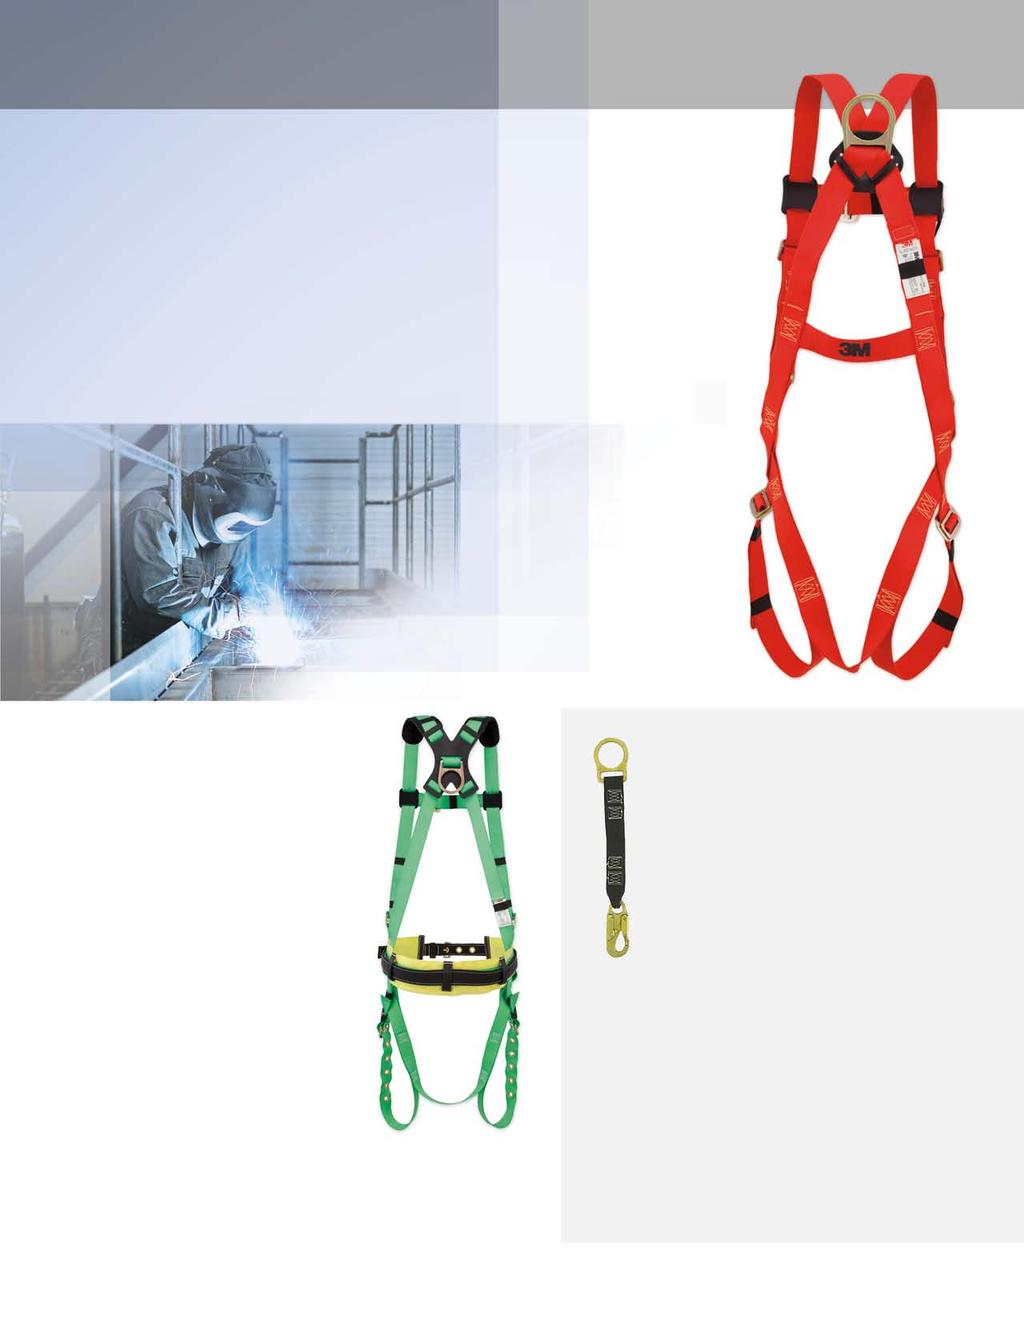 Specialty Harnesses SATURN [ FOR WELDING ] The Saturn harness is specifically designed for welding applications to provide char resistance.